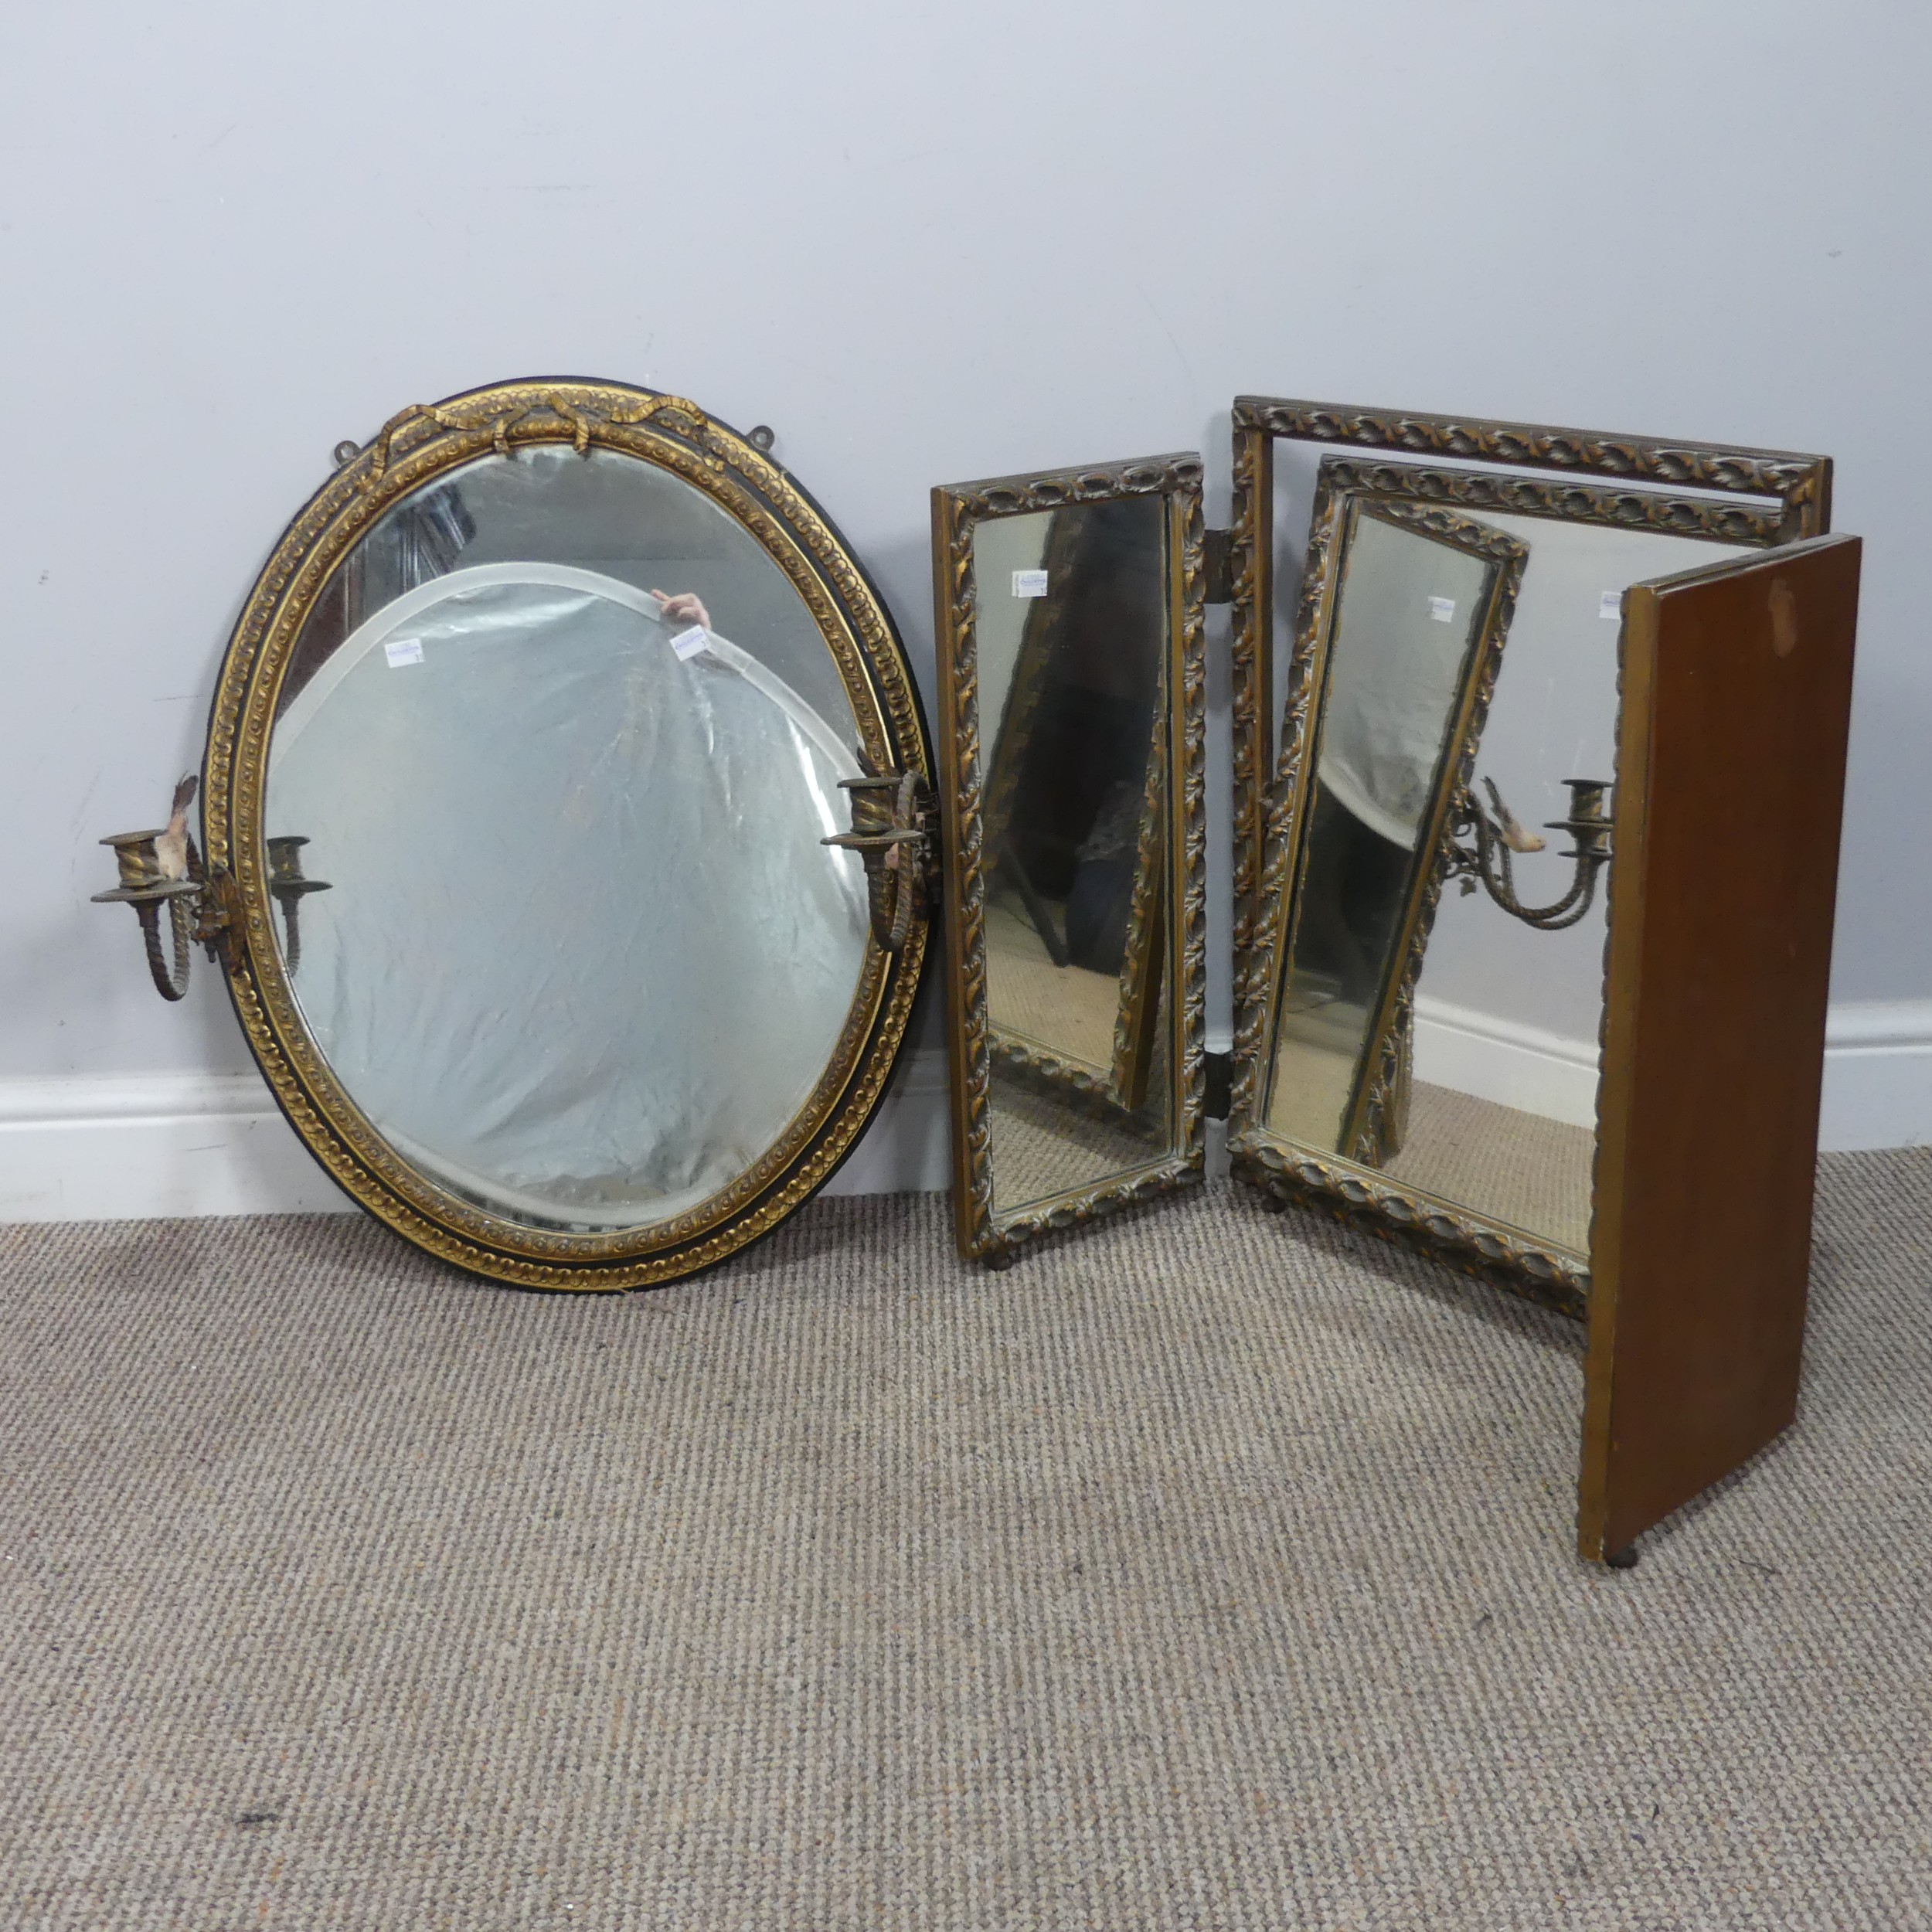 An early 20th century giltwood framed triptych dressing Mirror, W 91 cm x H 58 cm, together with